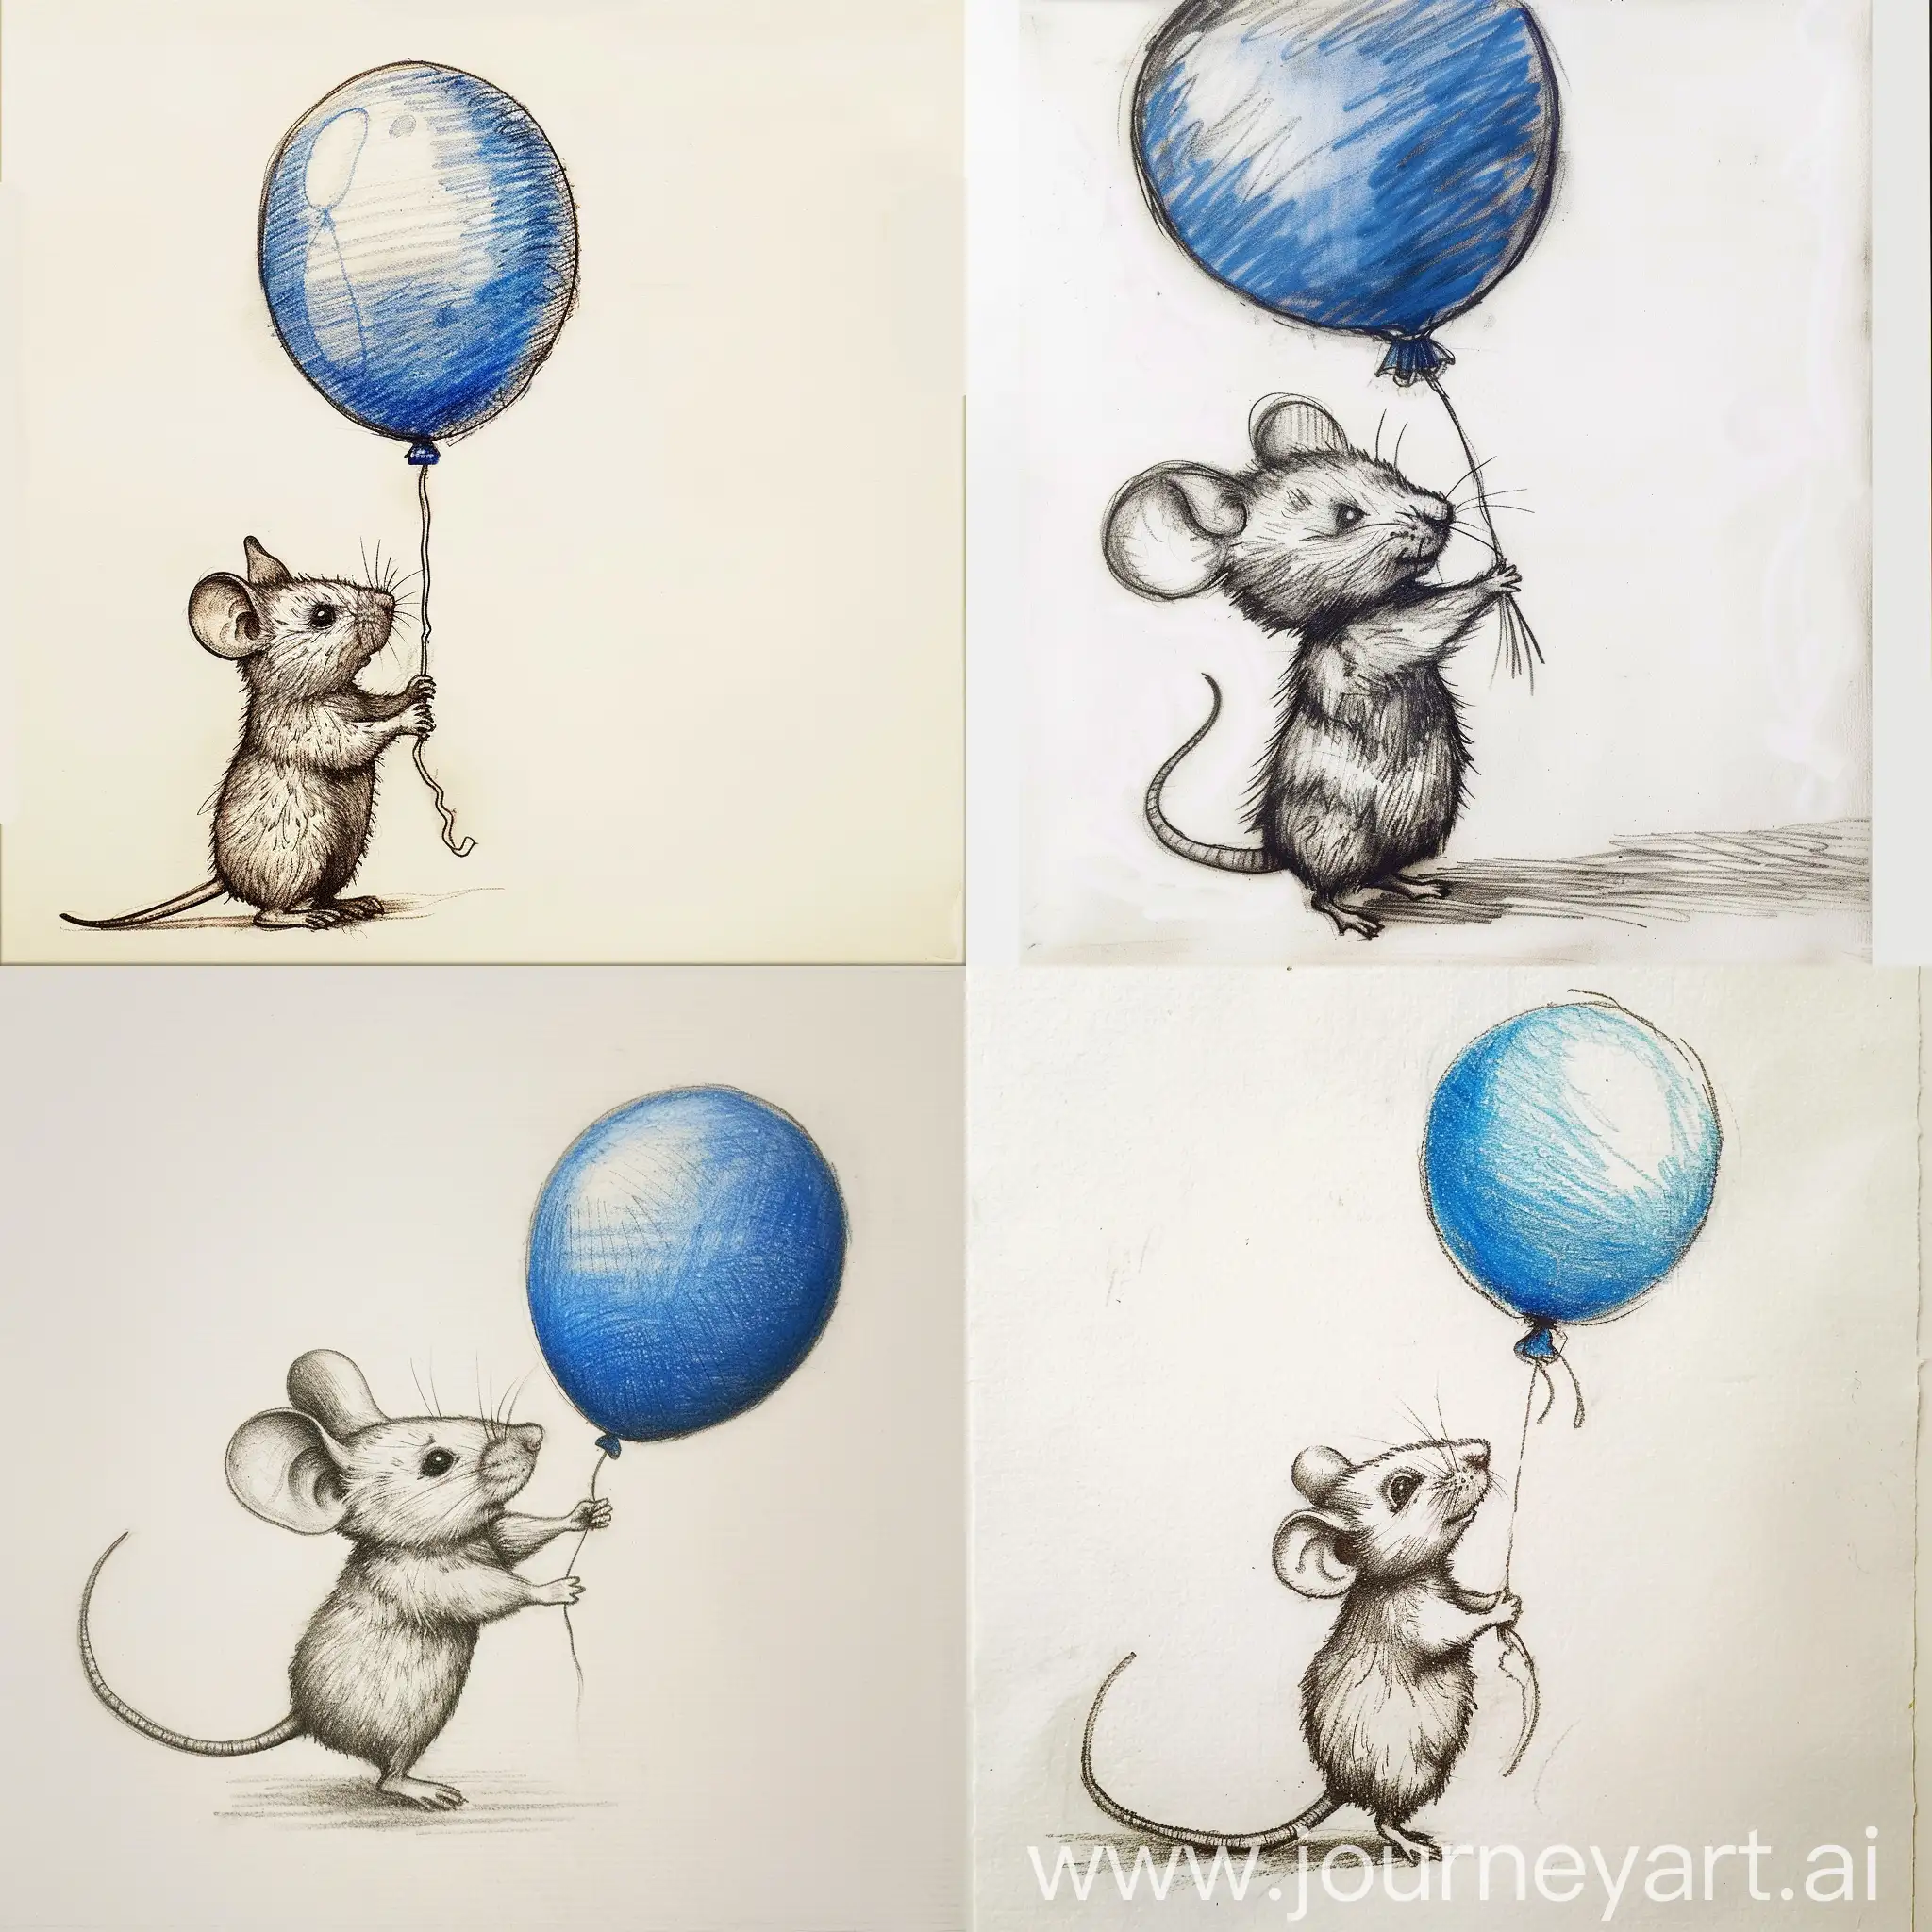 A mouse drawn in pencil on a white background holds a blue balloon